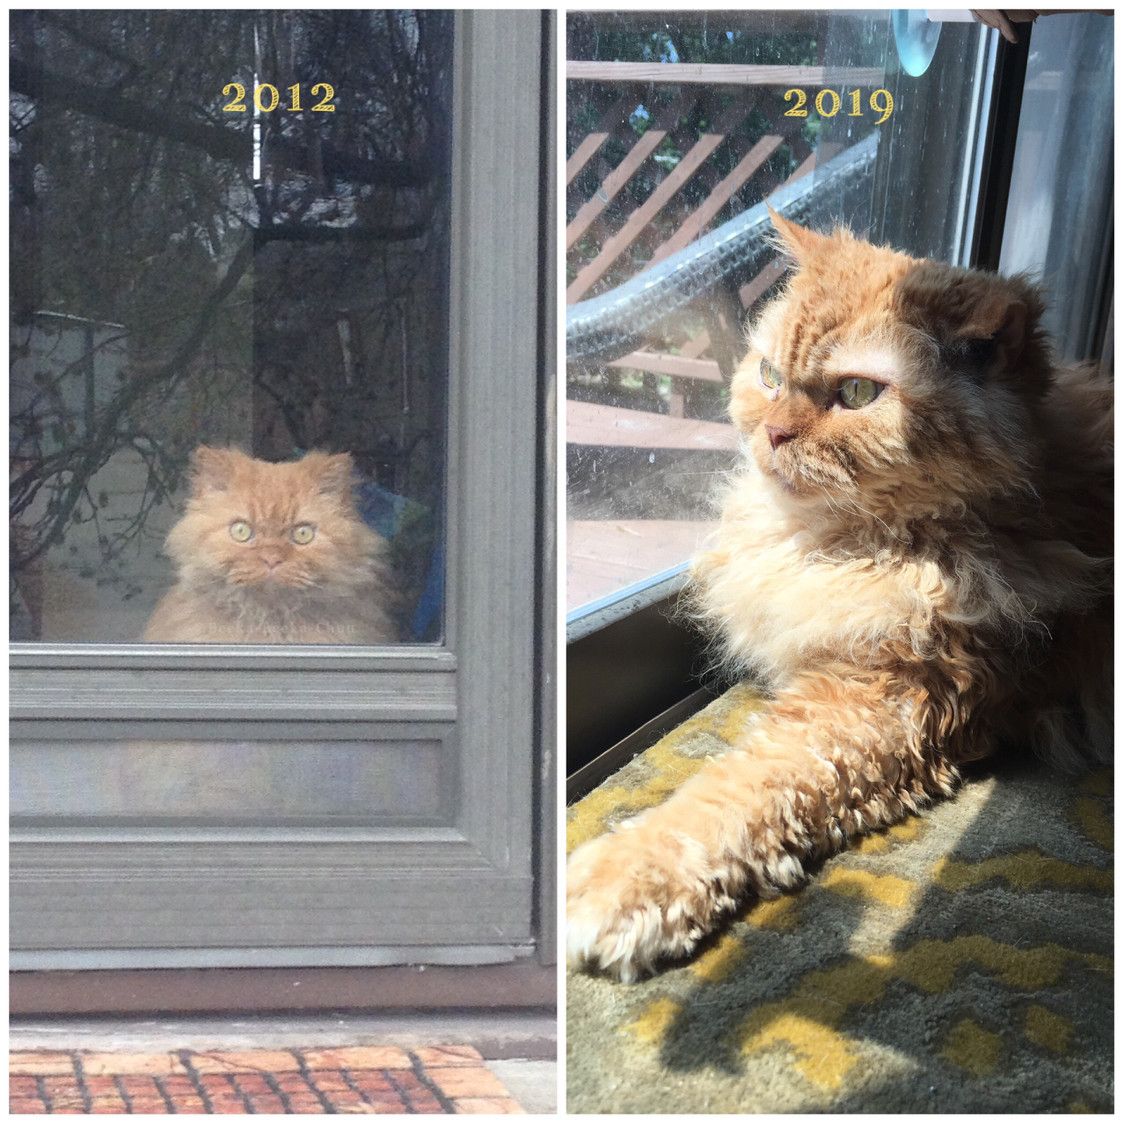 The “Plotting to Kill” cat - 7 years ago to today. Many years have passed yet he still thirsts for blood.